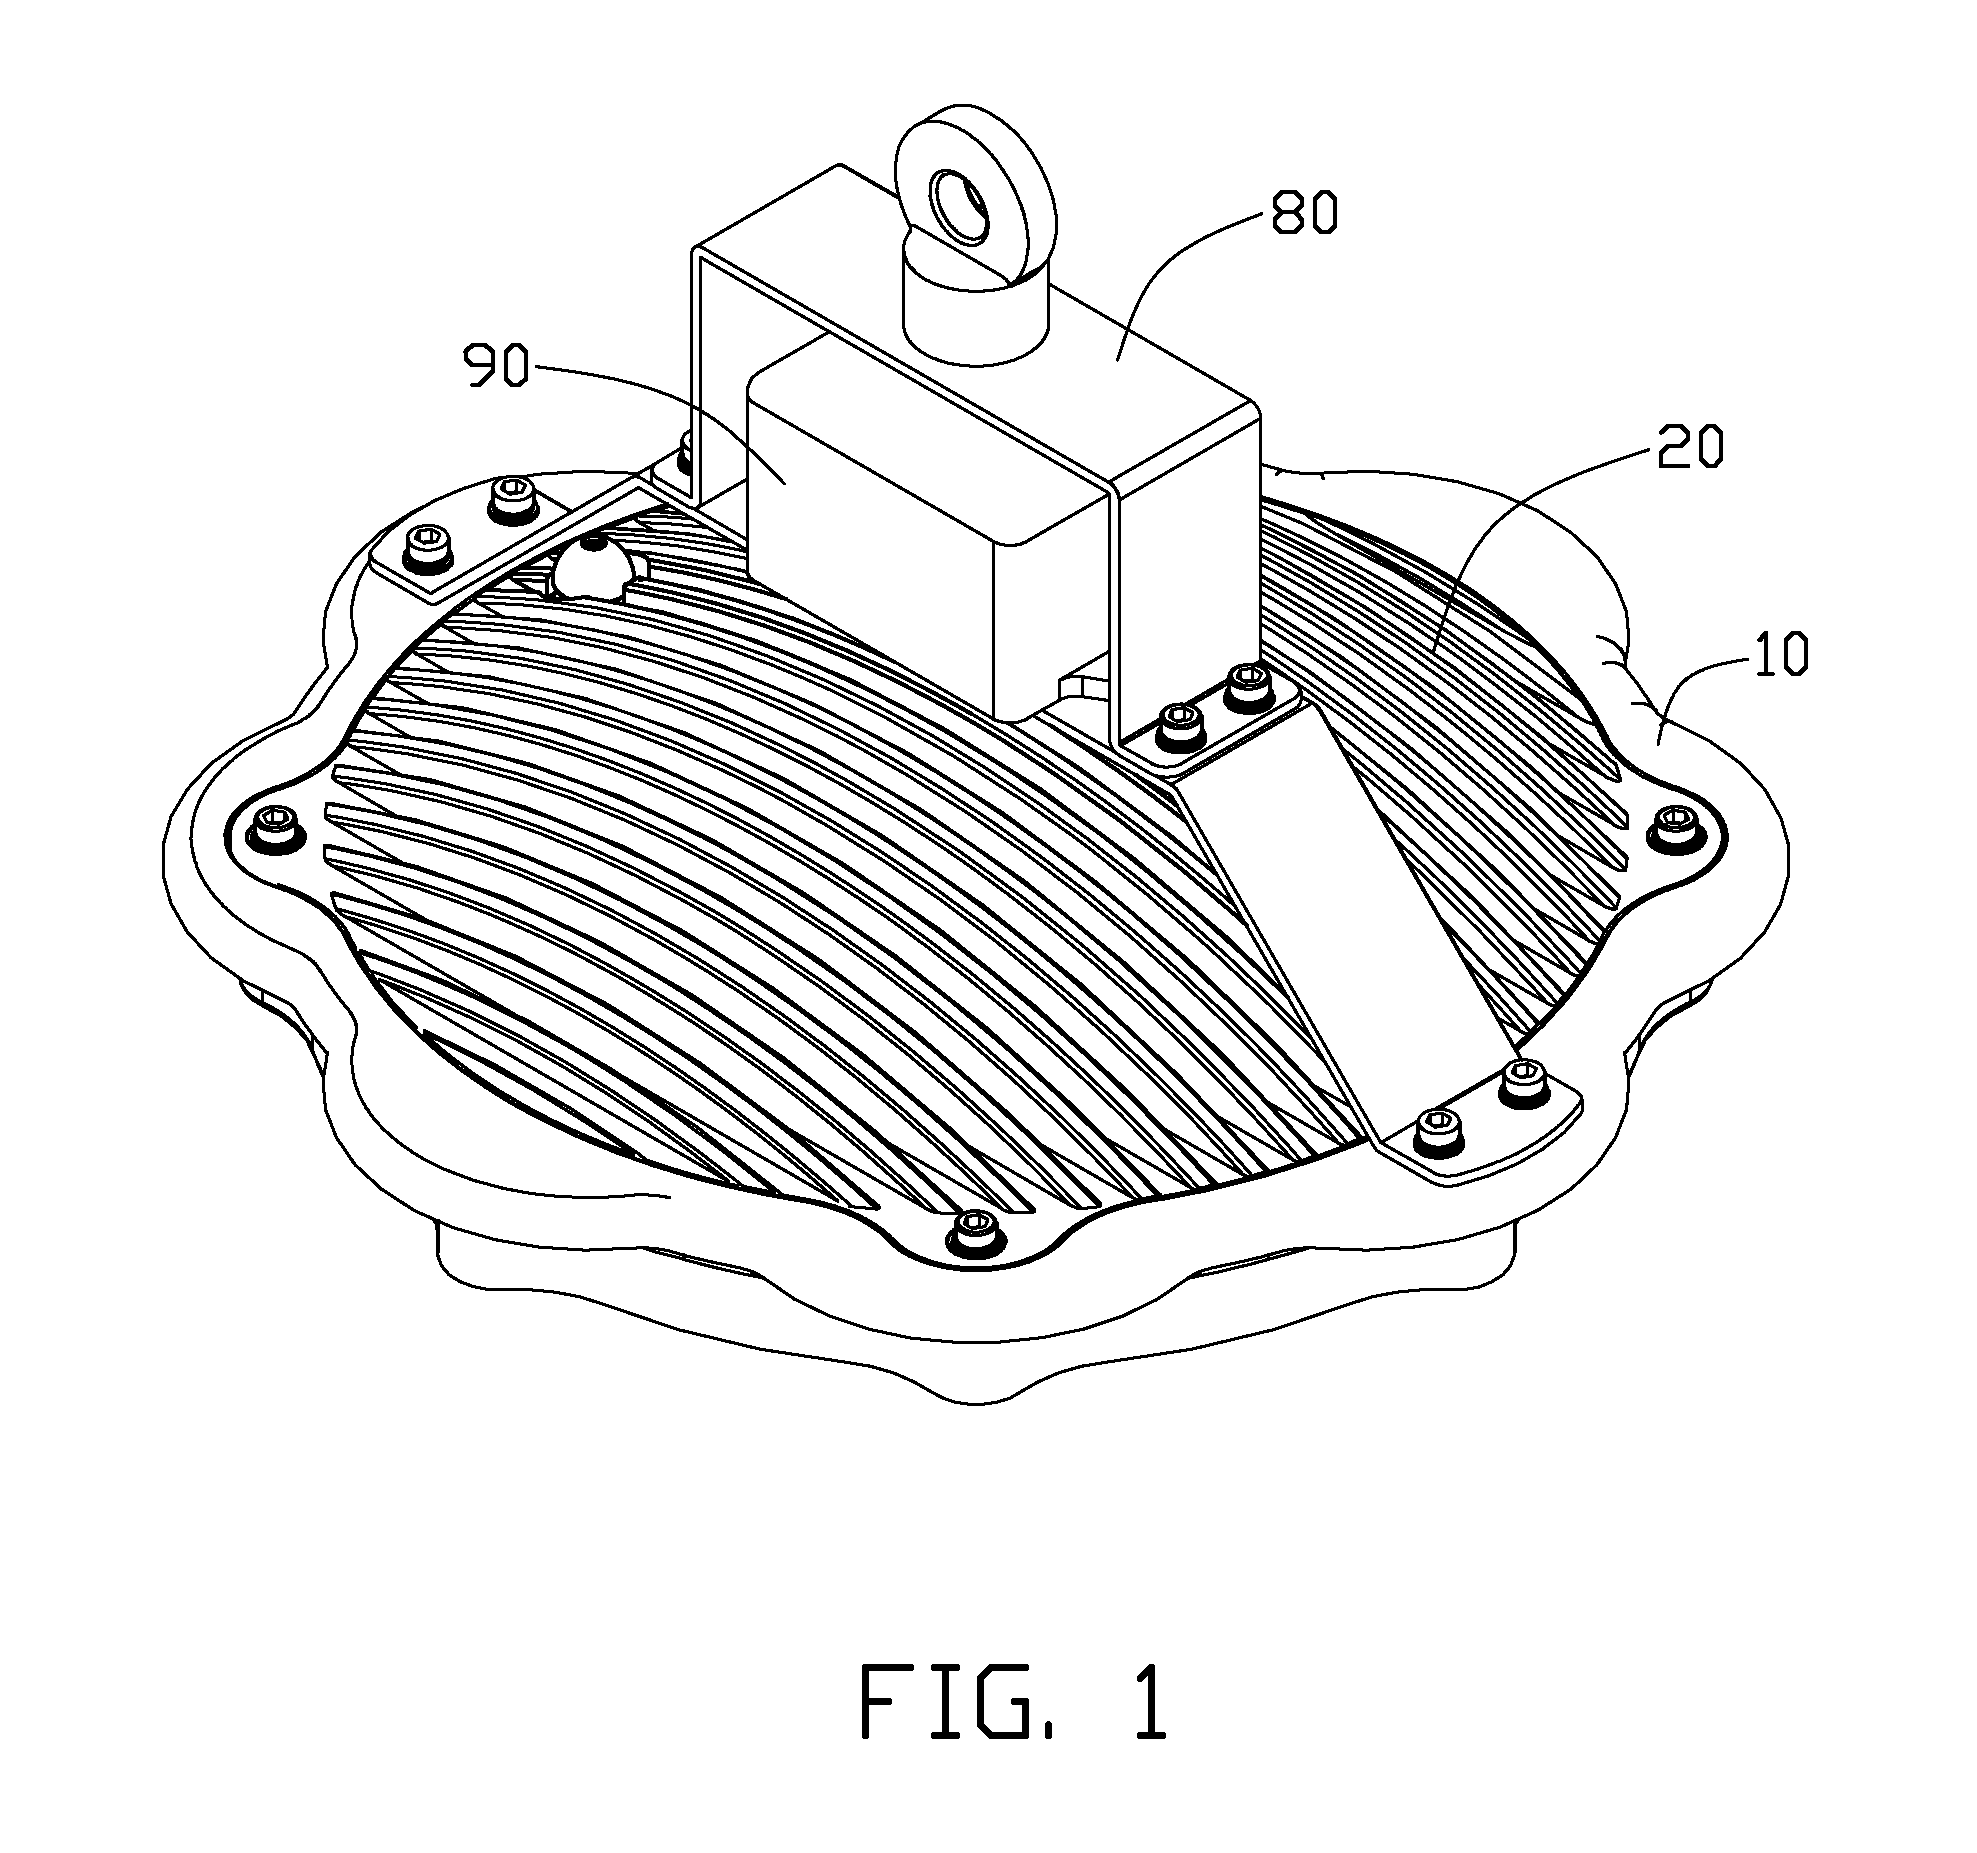 Compact LED lamp having heat dissipation structure